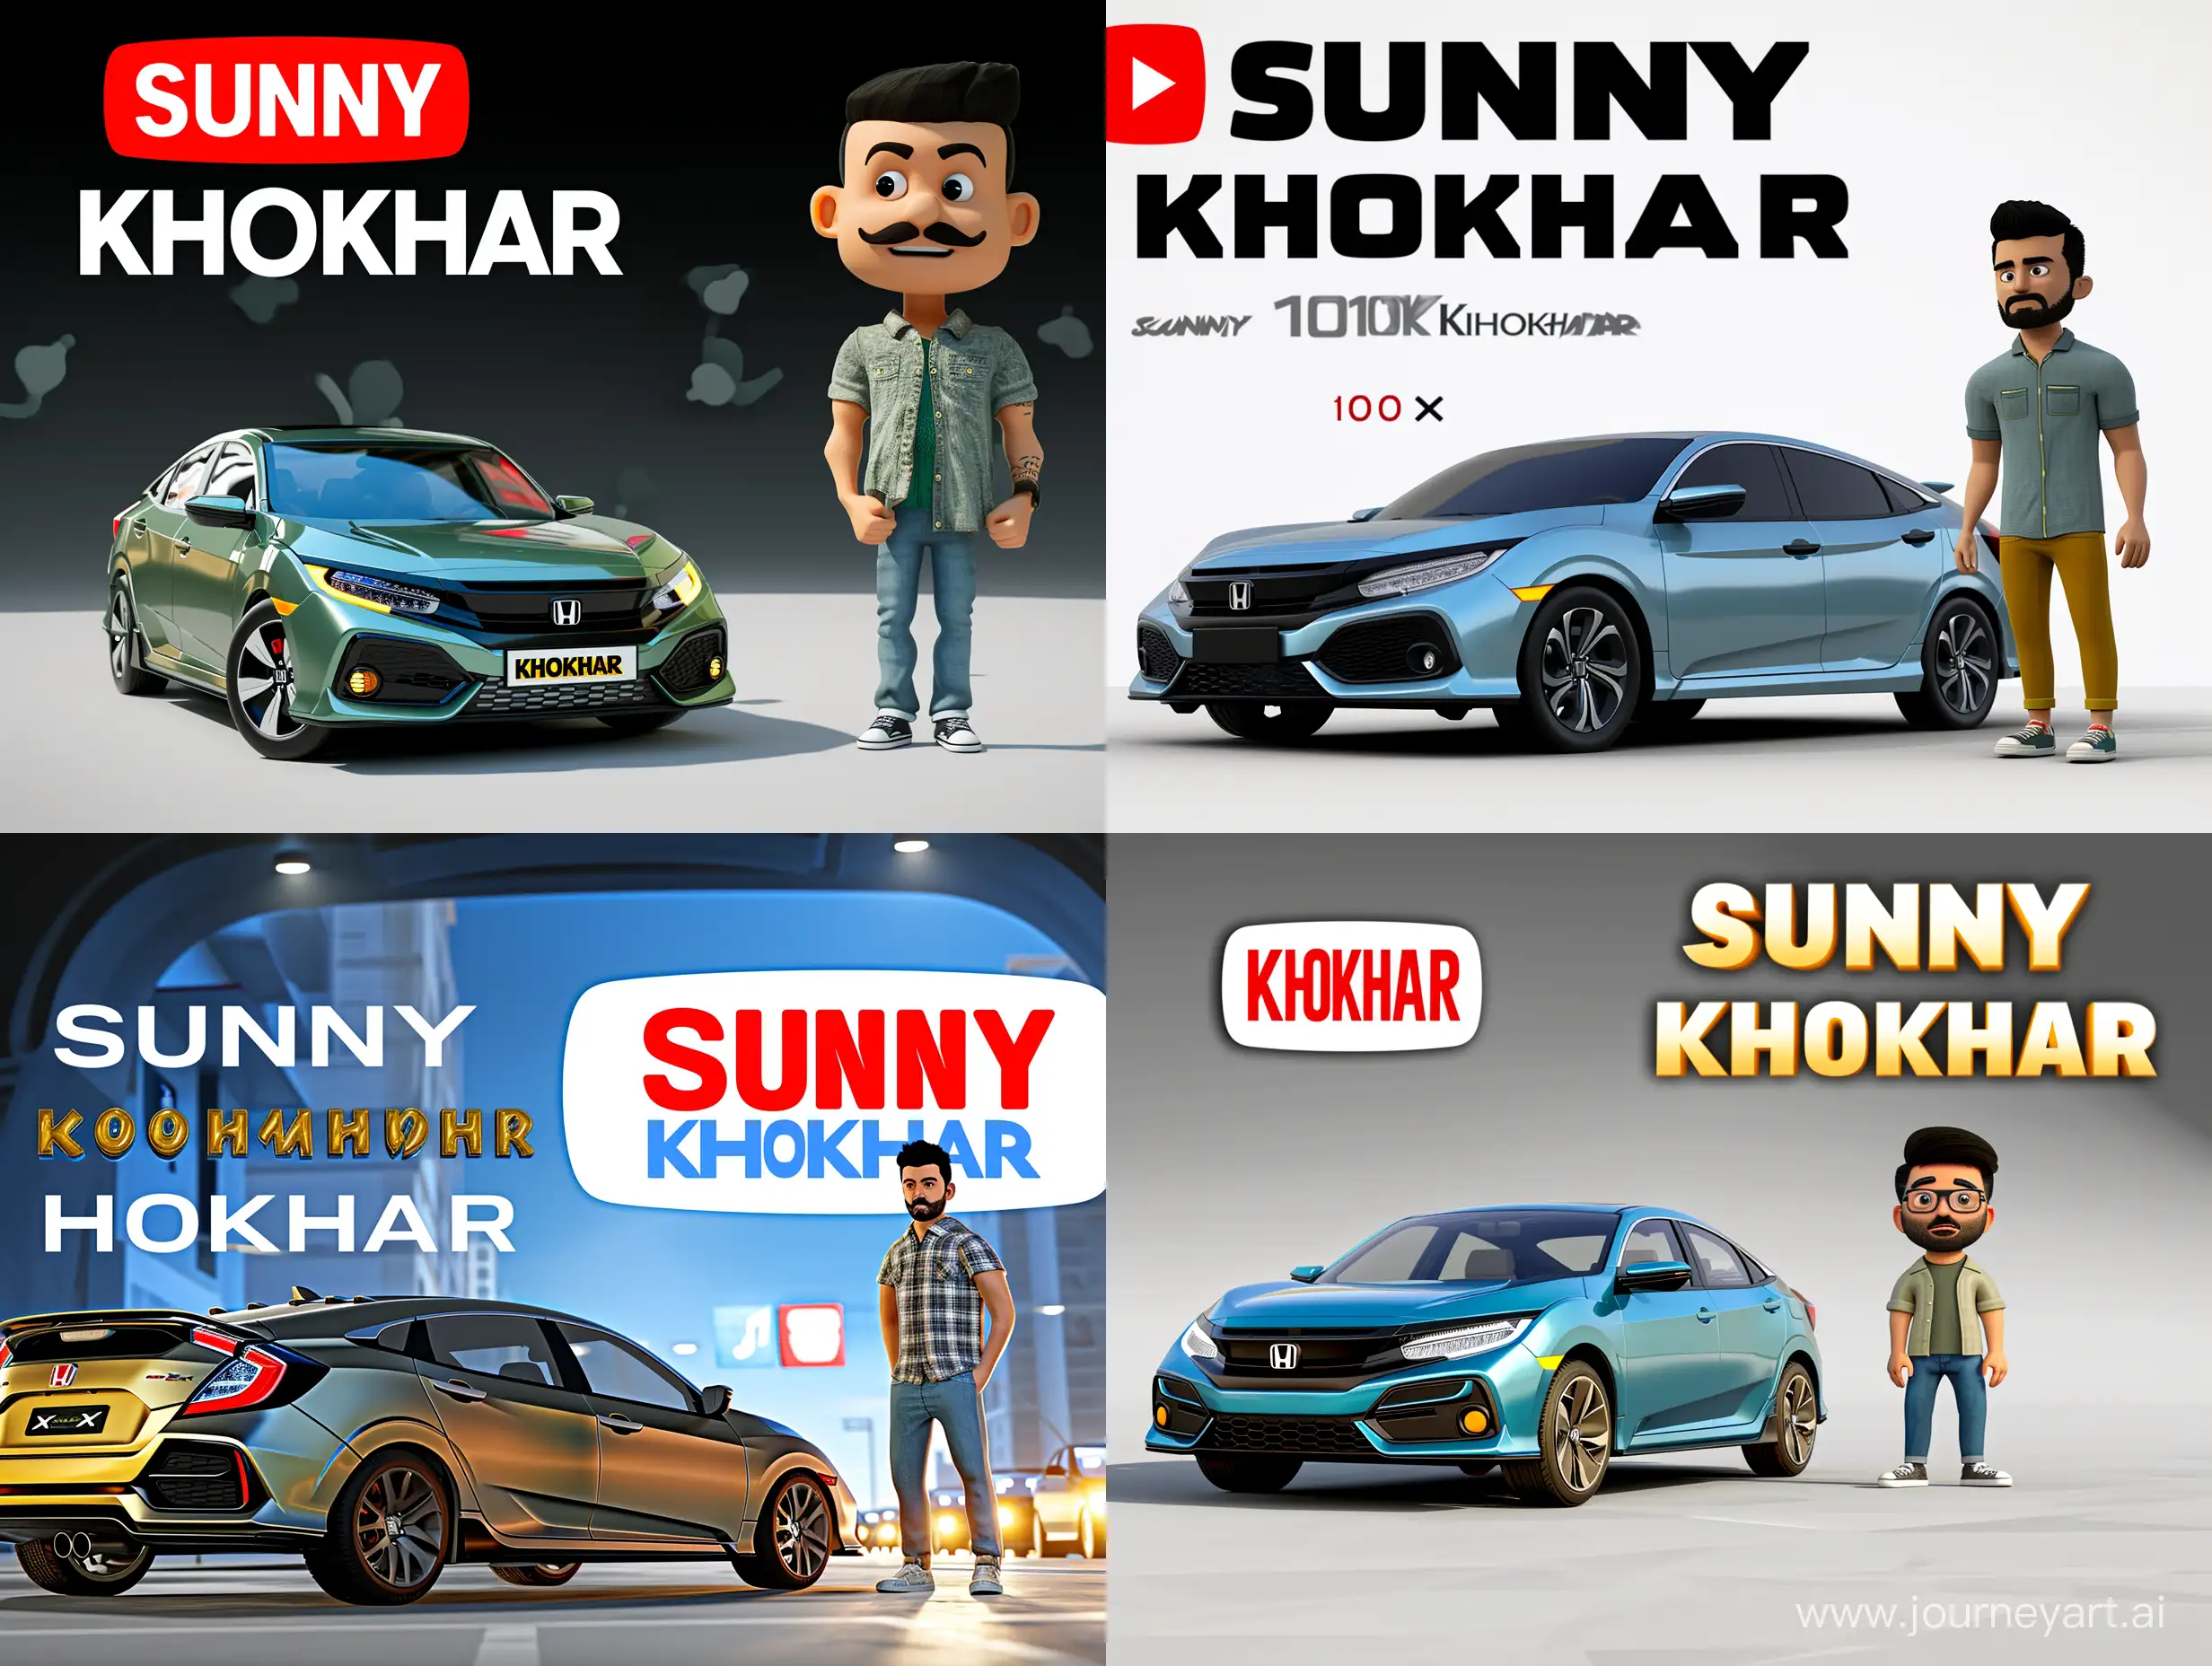 Create a 3D illustration of an animated character standing in front of a tenth 10th generation civic x sedan. The civic must be wrapped in a Youtube social media profile page. character details a young man in his thirties standing casually right next to his car wearing casual clothes such as a shirt jeans sneakers short hair and short beard moustache. social media page details user name SUNNY KHOKHAR. Followers 100k. The background of the image is a social media profile of Youtube page with a user name “SUNNY KHOKHAR” and a profile picture that match.